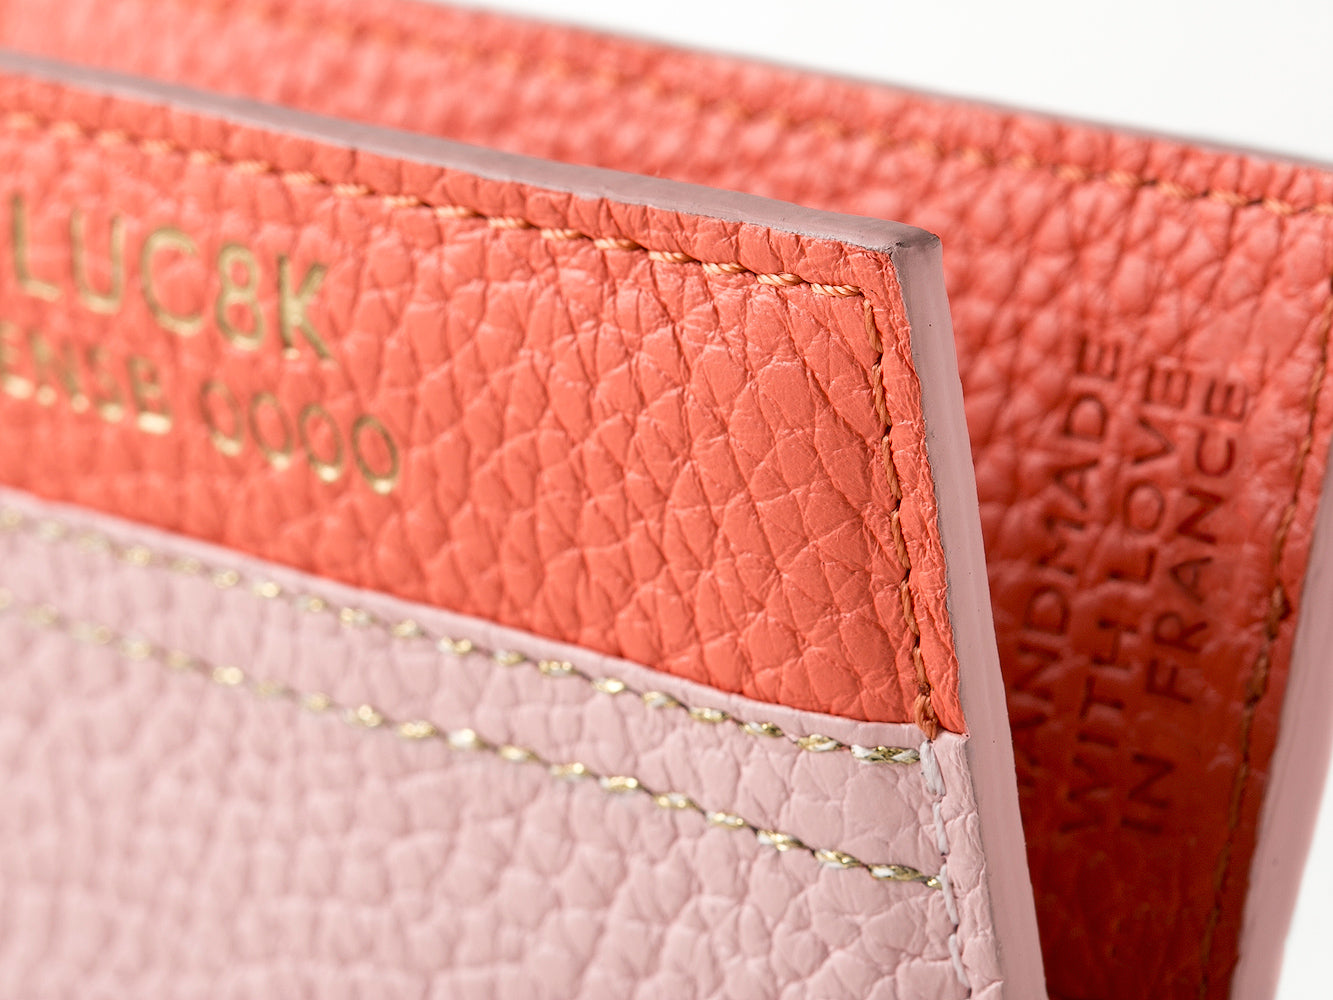 Handmade leather cardholder in pink and red sustainable leather handmade in france